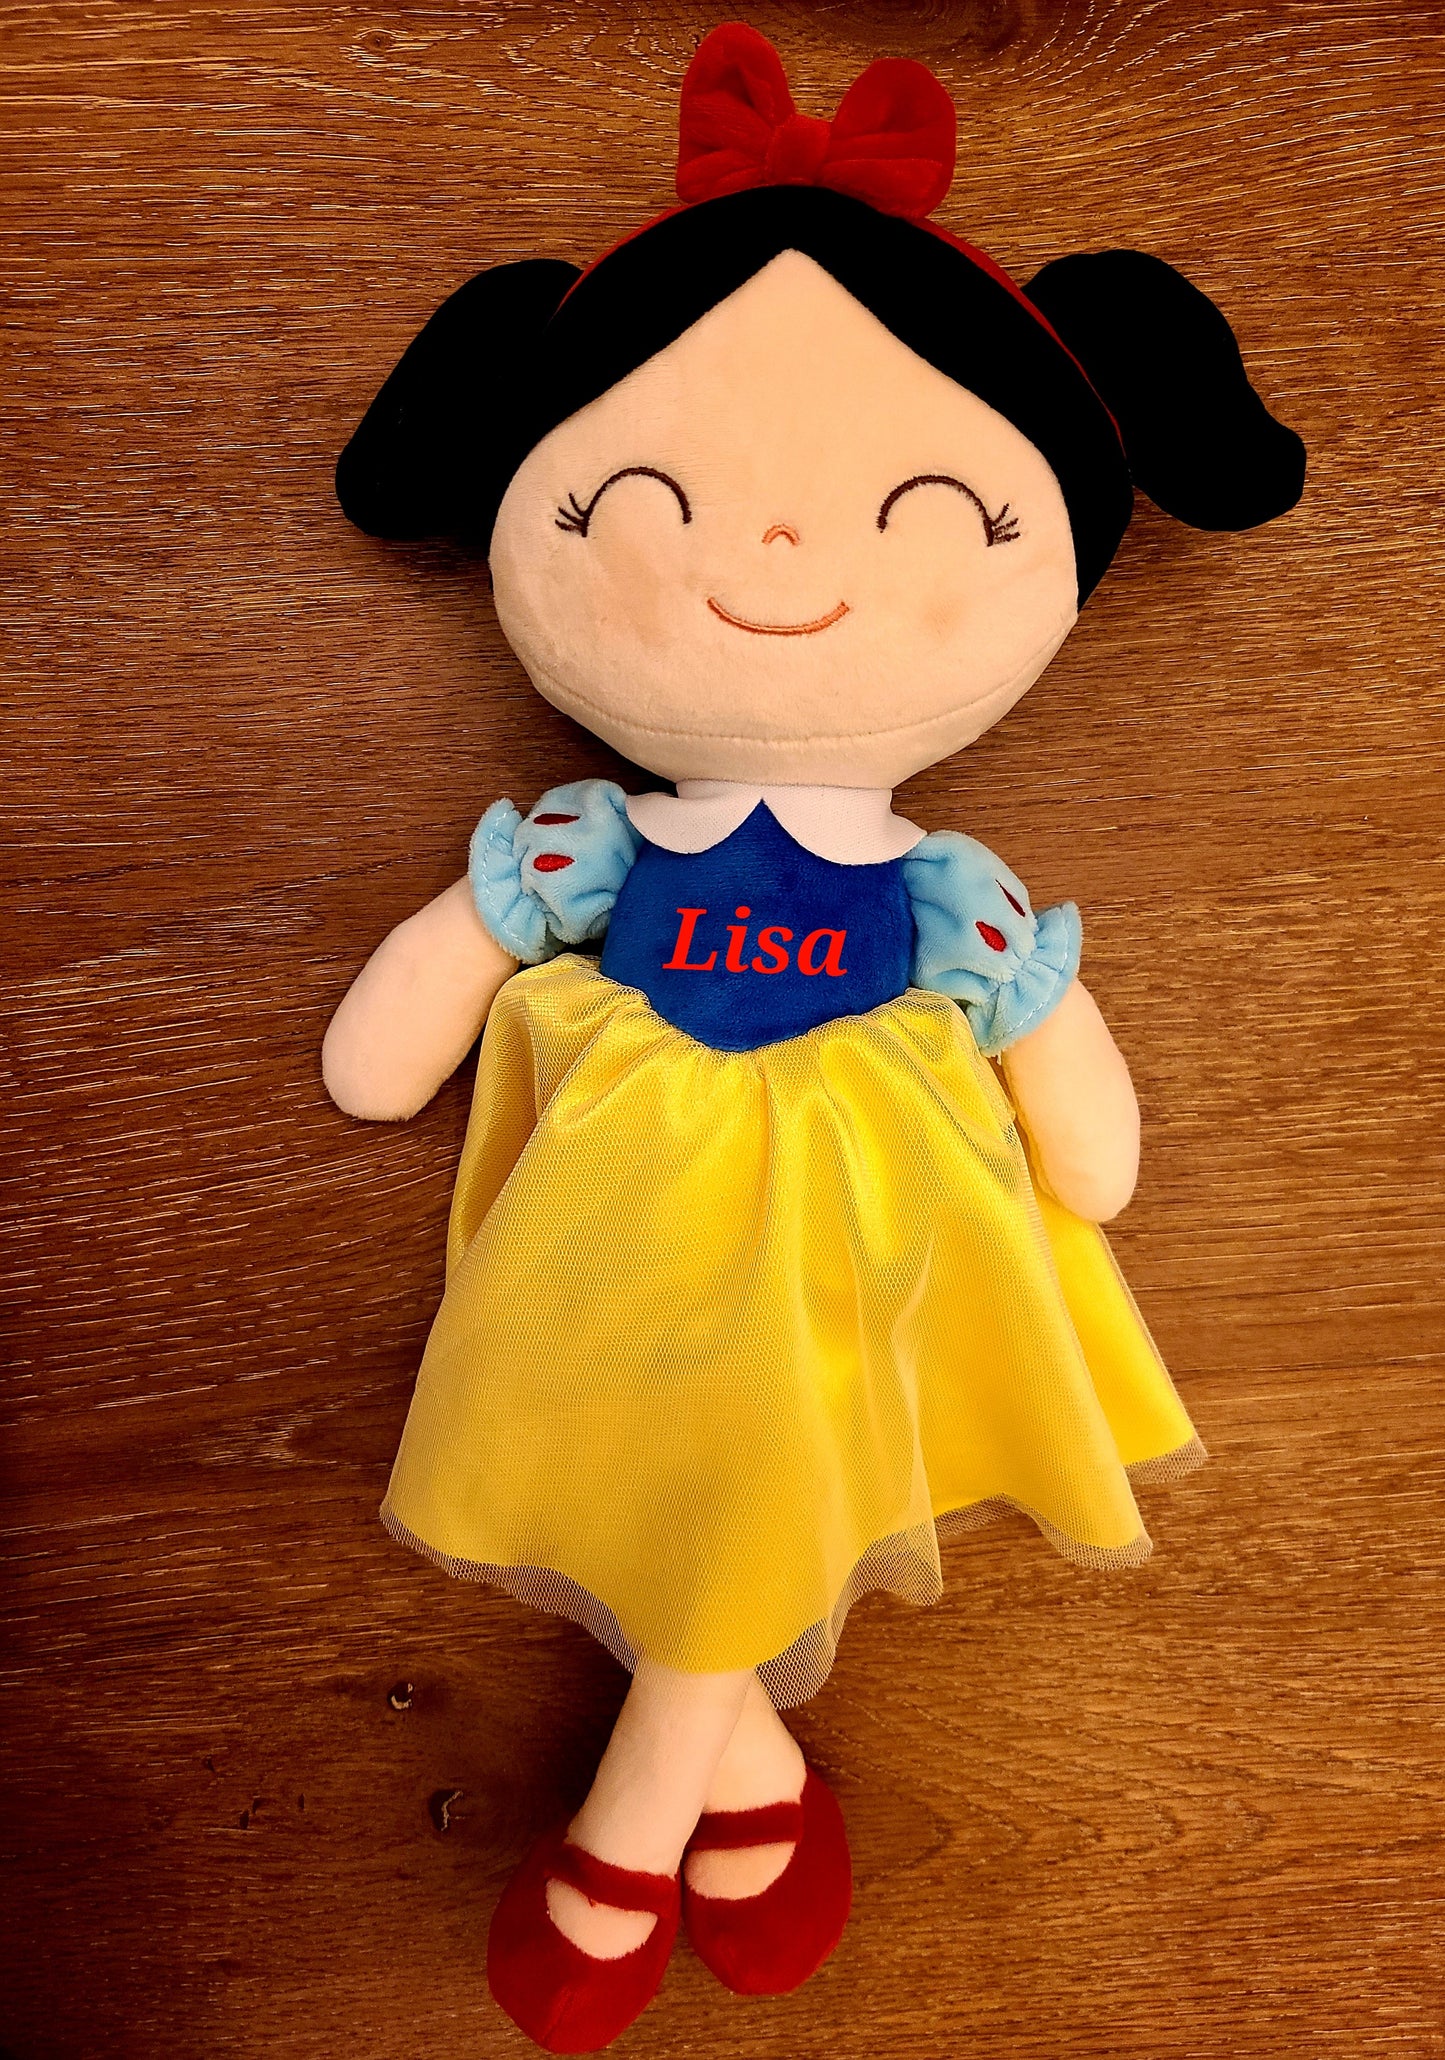 Personalized Soft Rag 15in Snow white Inspired Baby Girl Plush Doll Toy/Handmade Baby Gift Toy/Decor